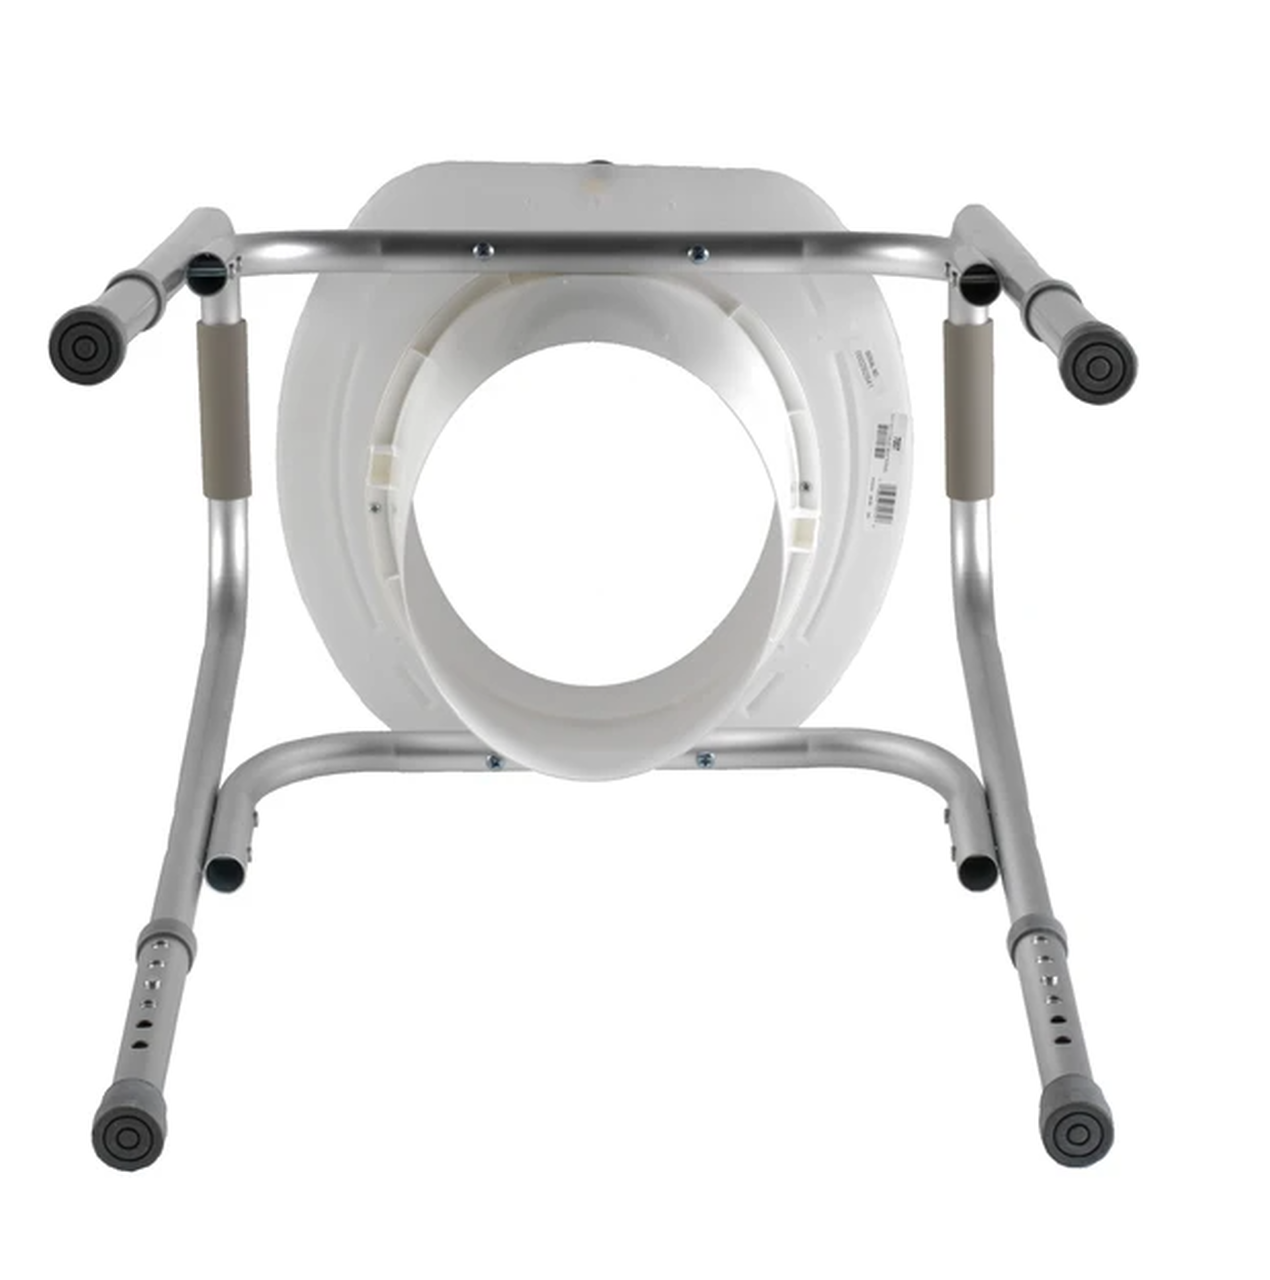 ActivKare Adjustable Bath chair with back rest